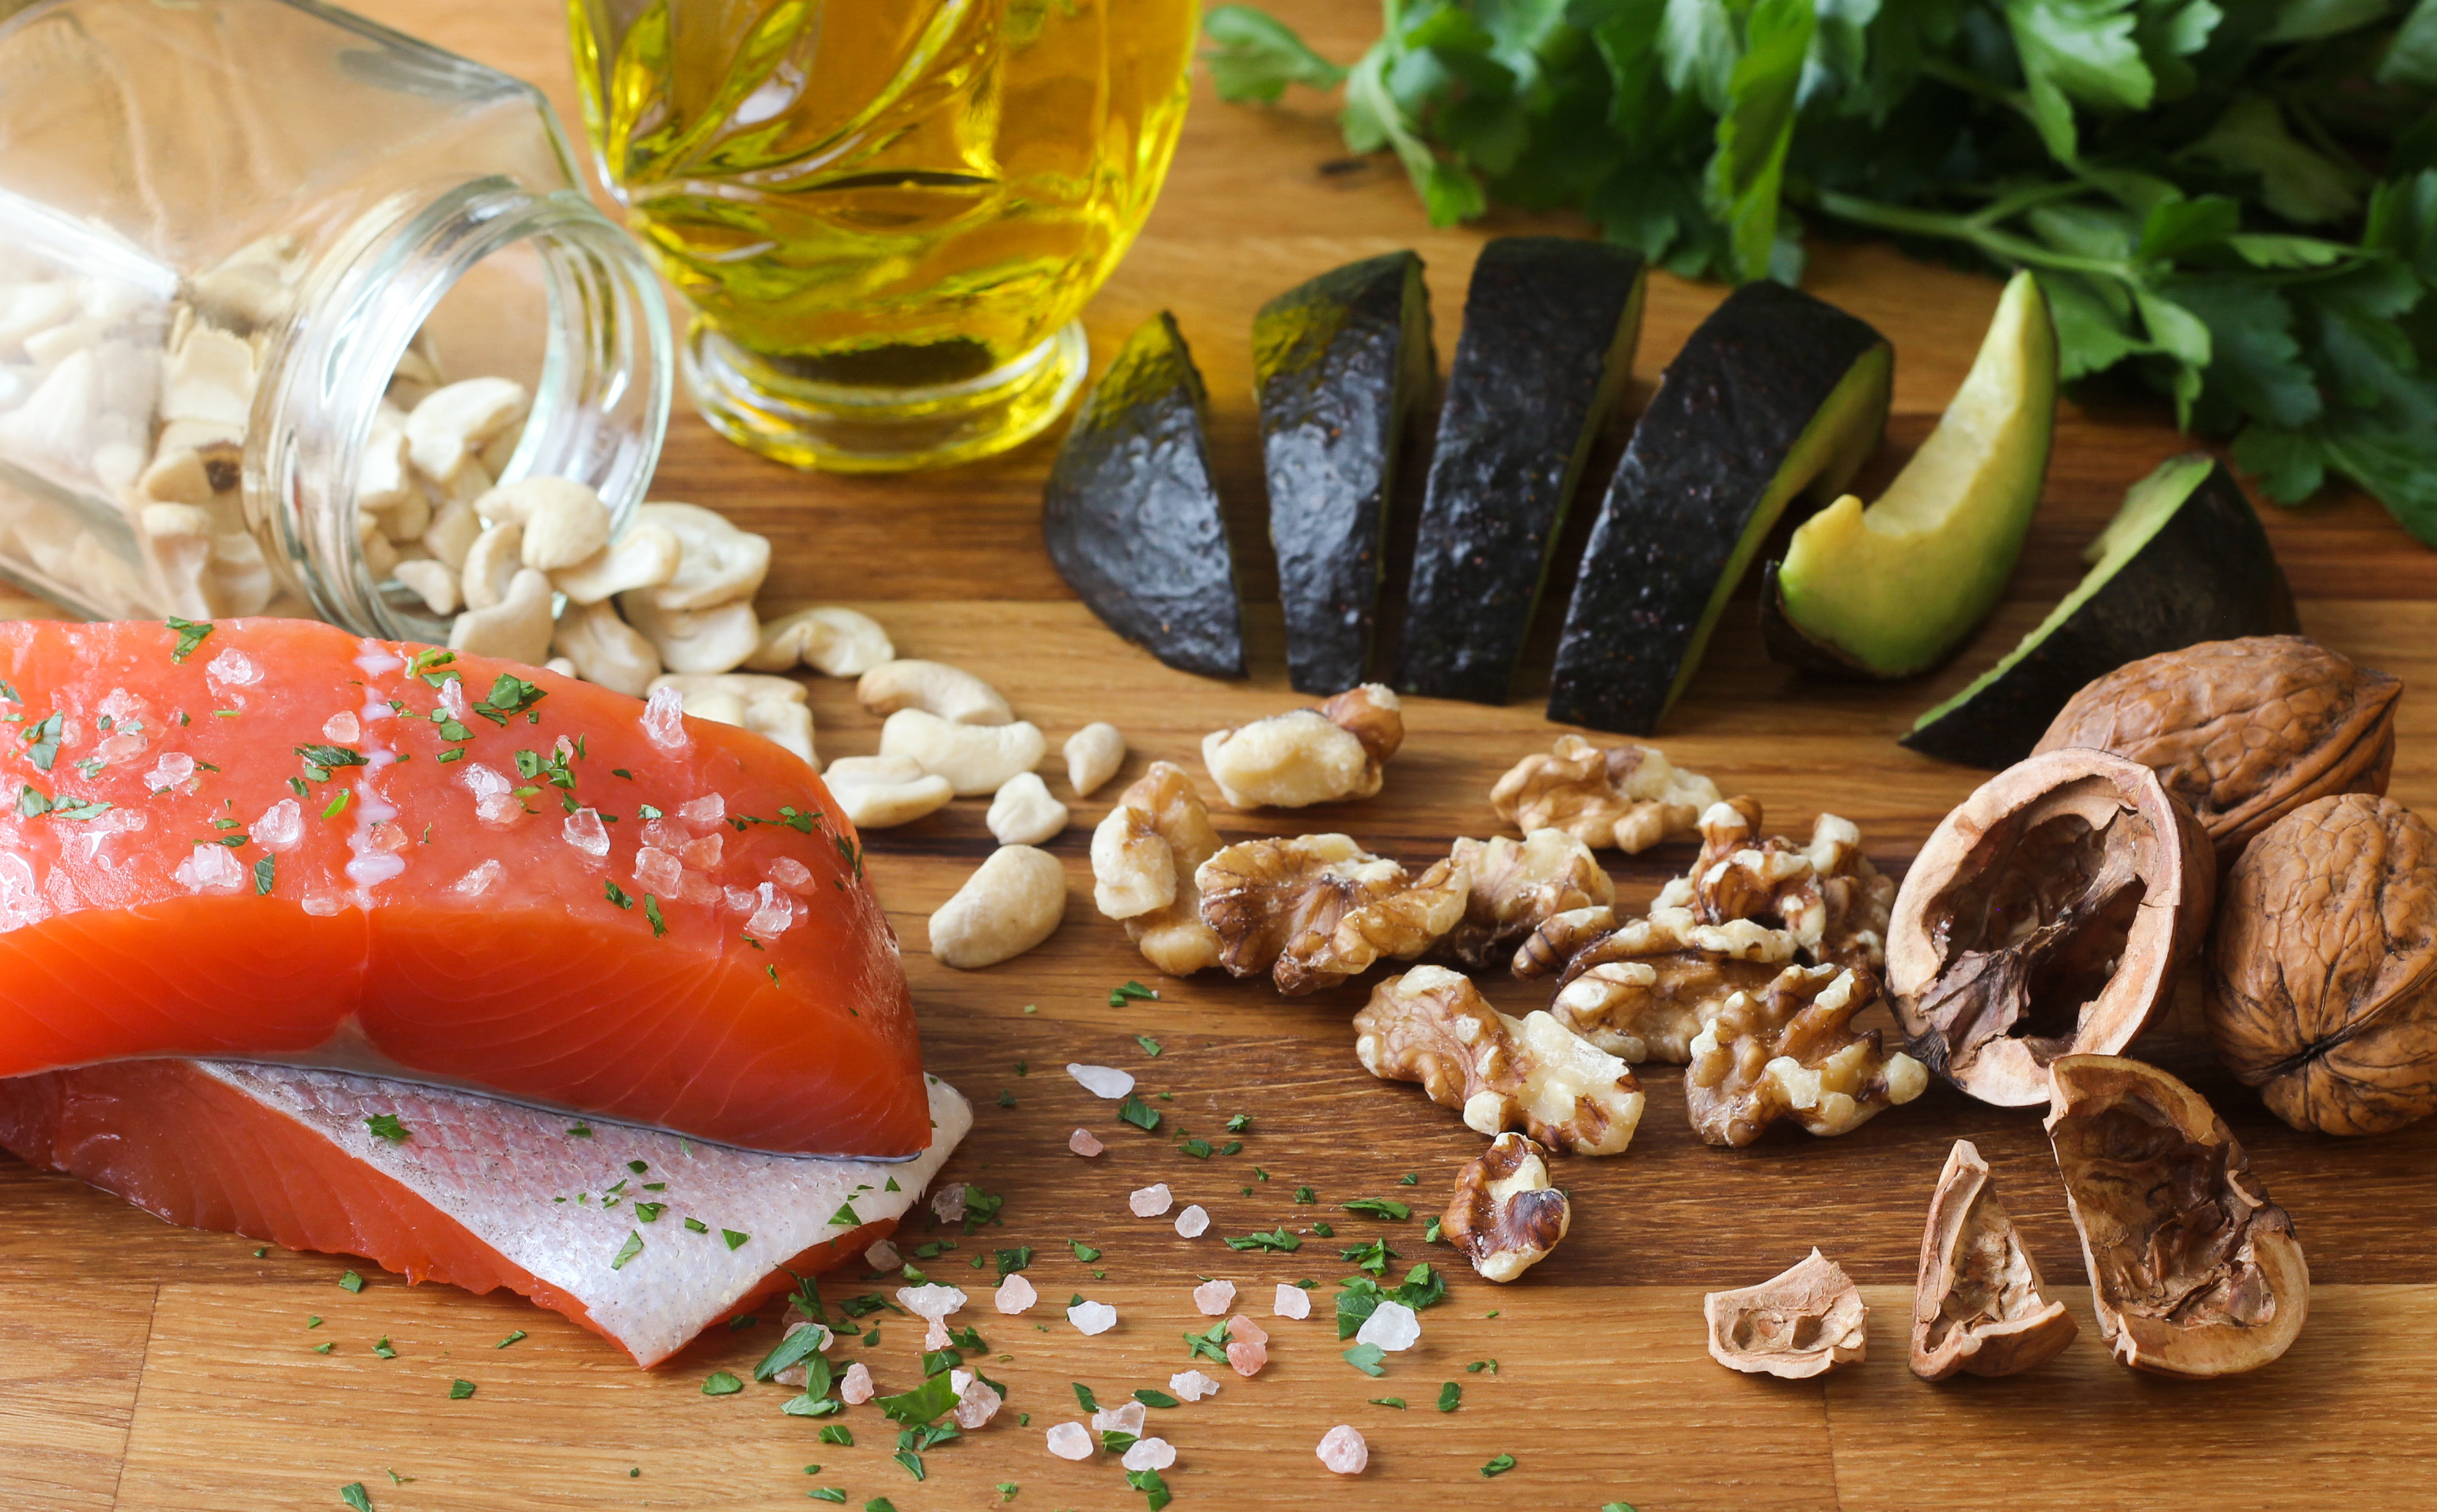 Atkins' Take on the Mediterranean, Pegan and Whole 30 Diets | Atkins